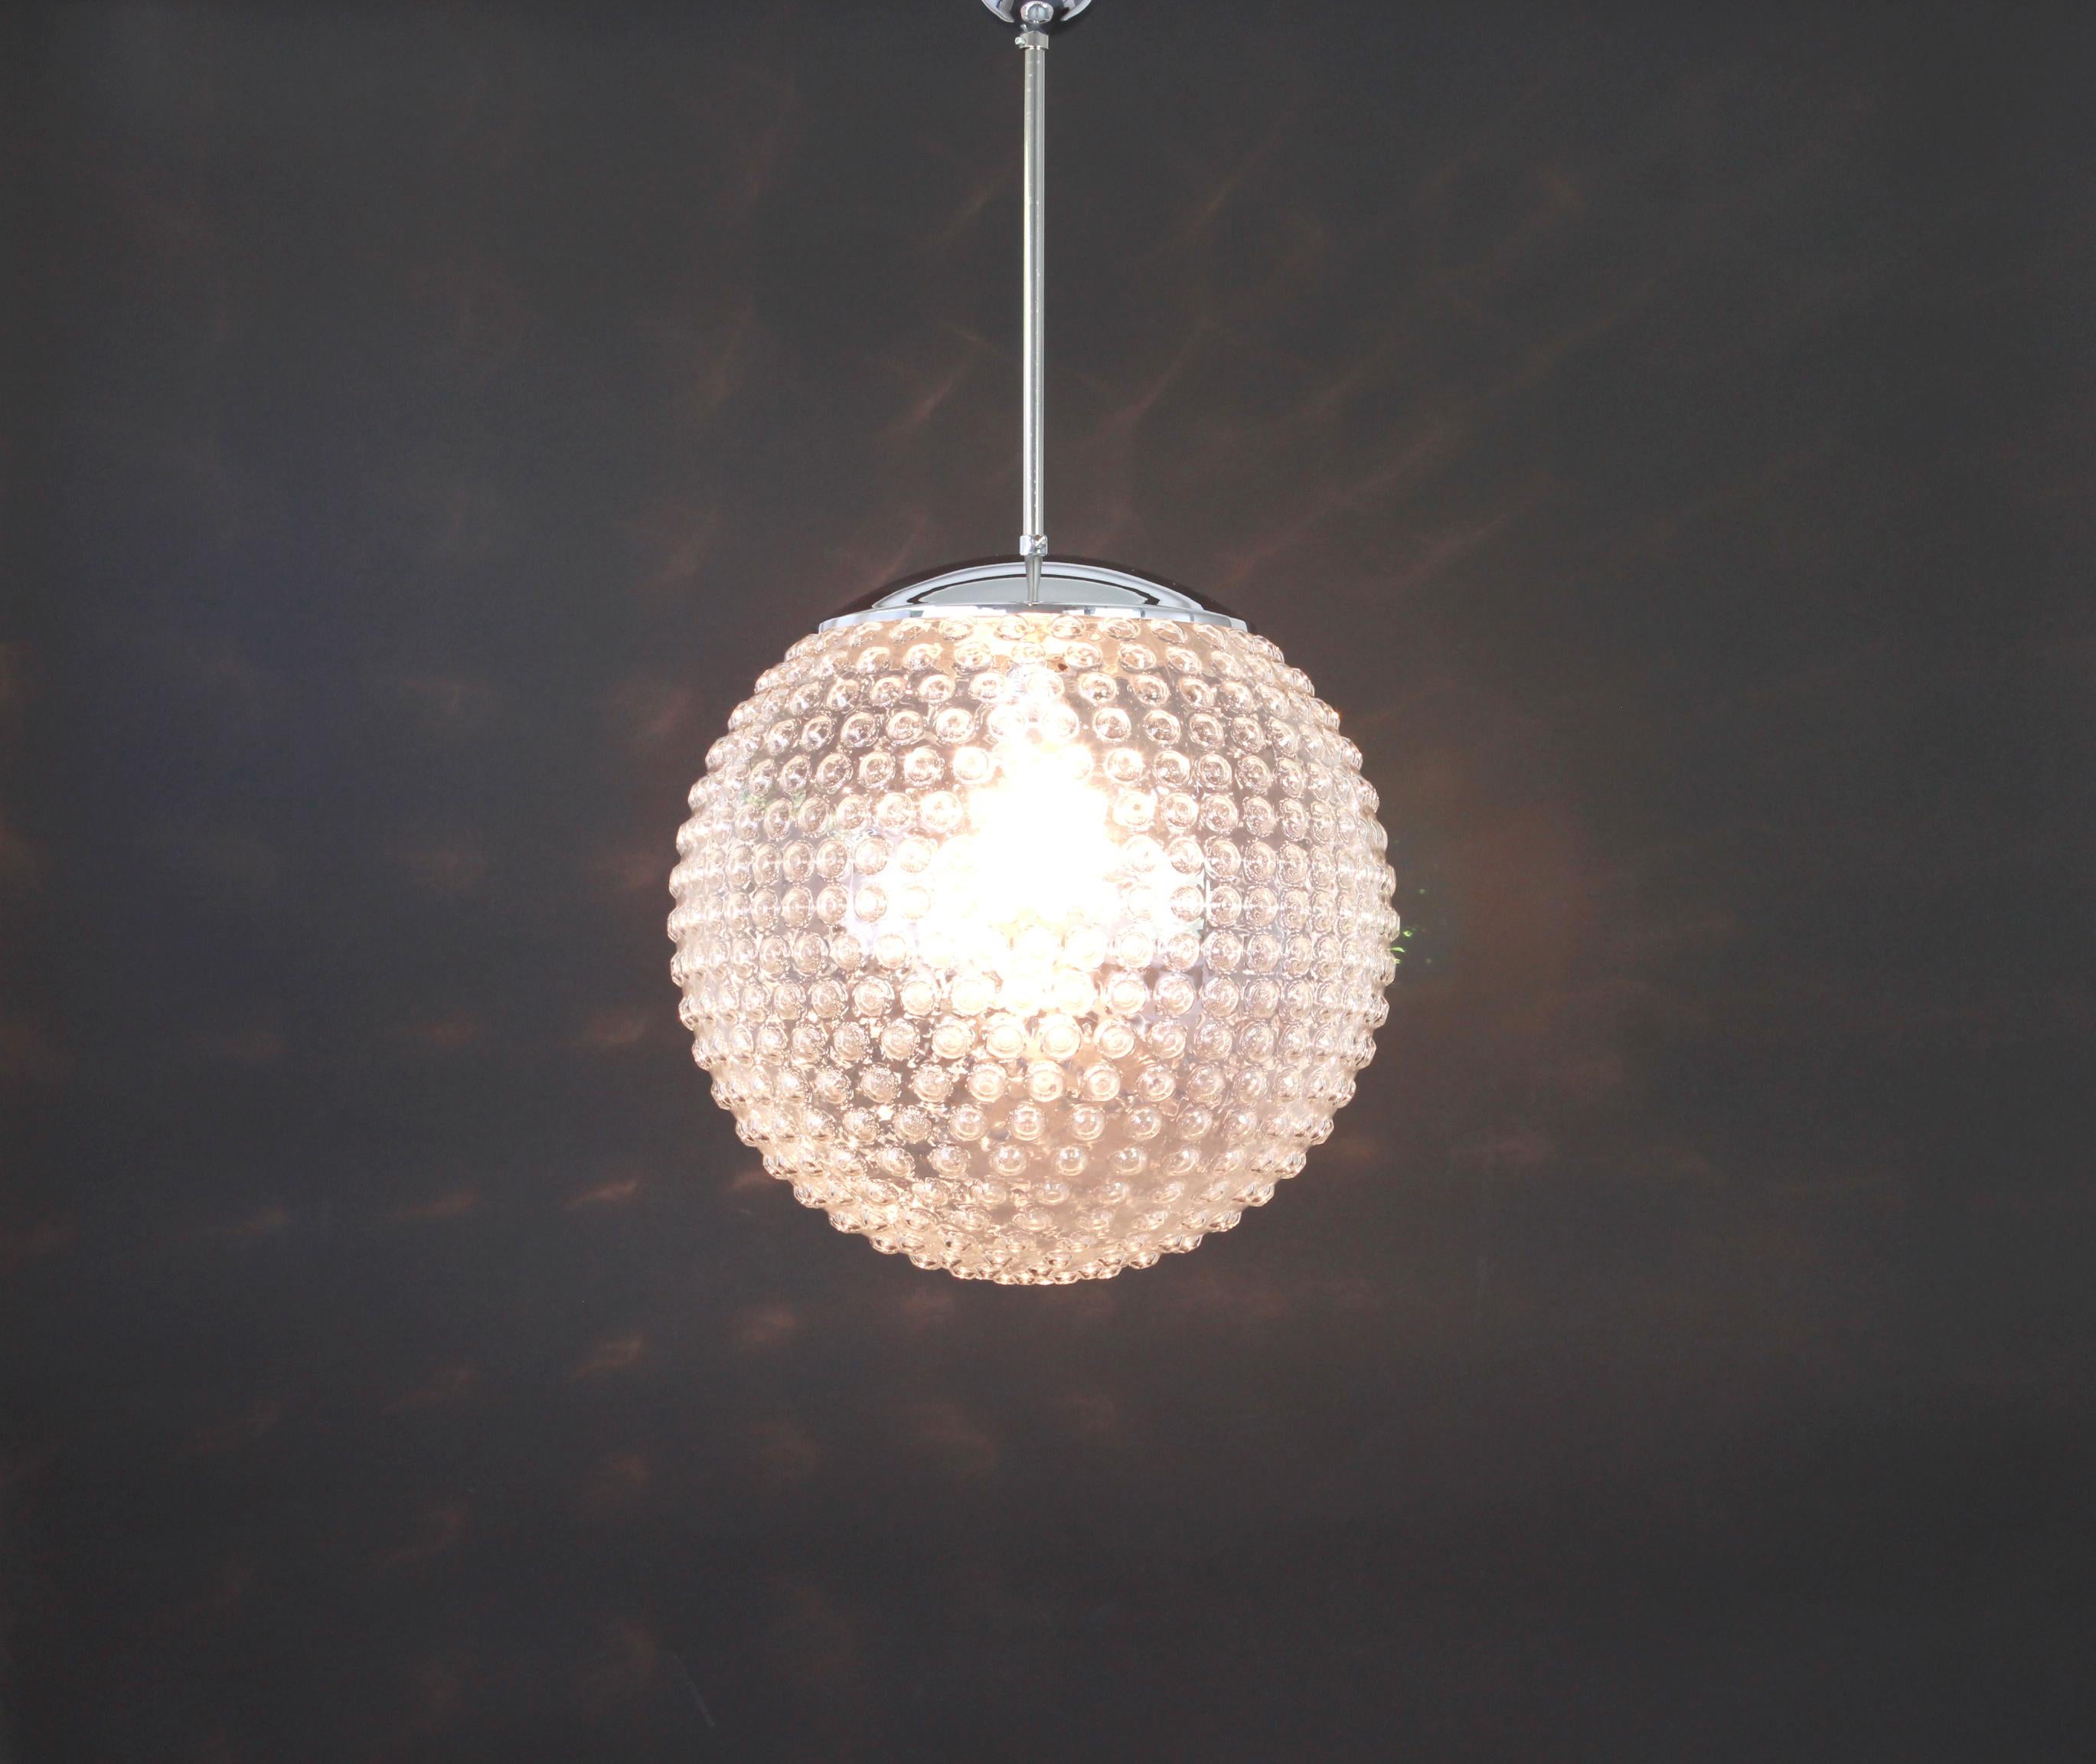 Rare designer glass pendant lamp by Rolf Krüger for Staff, Germany, 1970s, Germany, circa 1970-1979.

Sockets: One x E27 standard bulb (max. 100 Watts) and compatible also with the US standards

Measures: Diameter 33 cm // 13 inches
Height